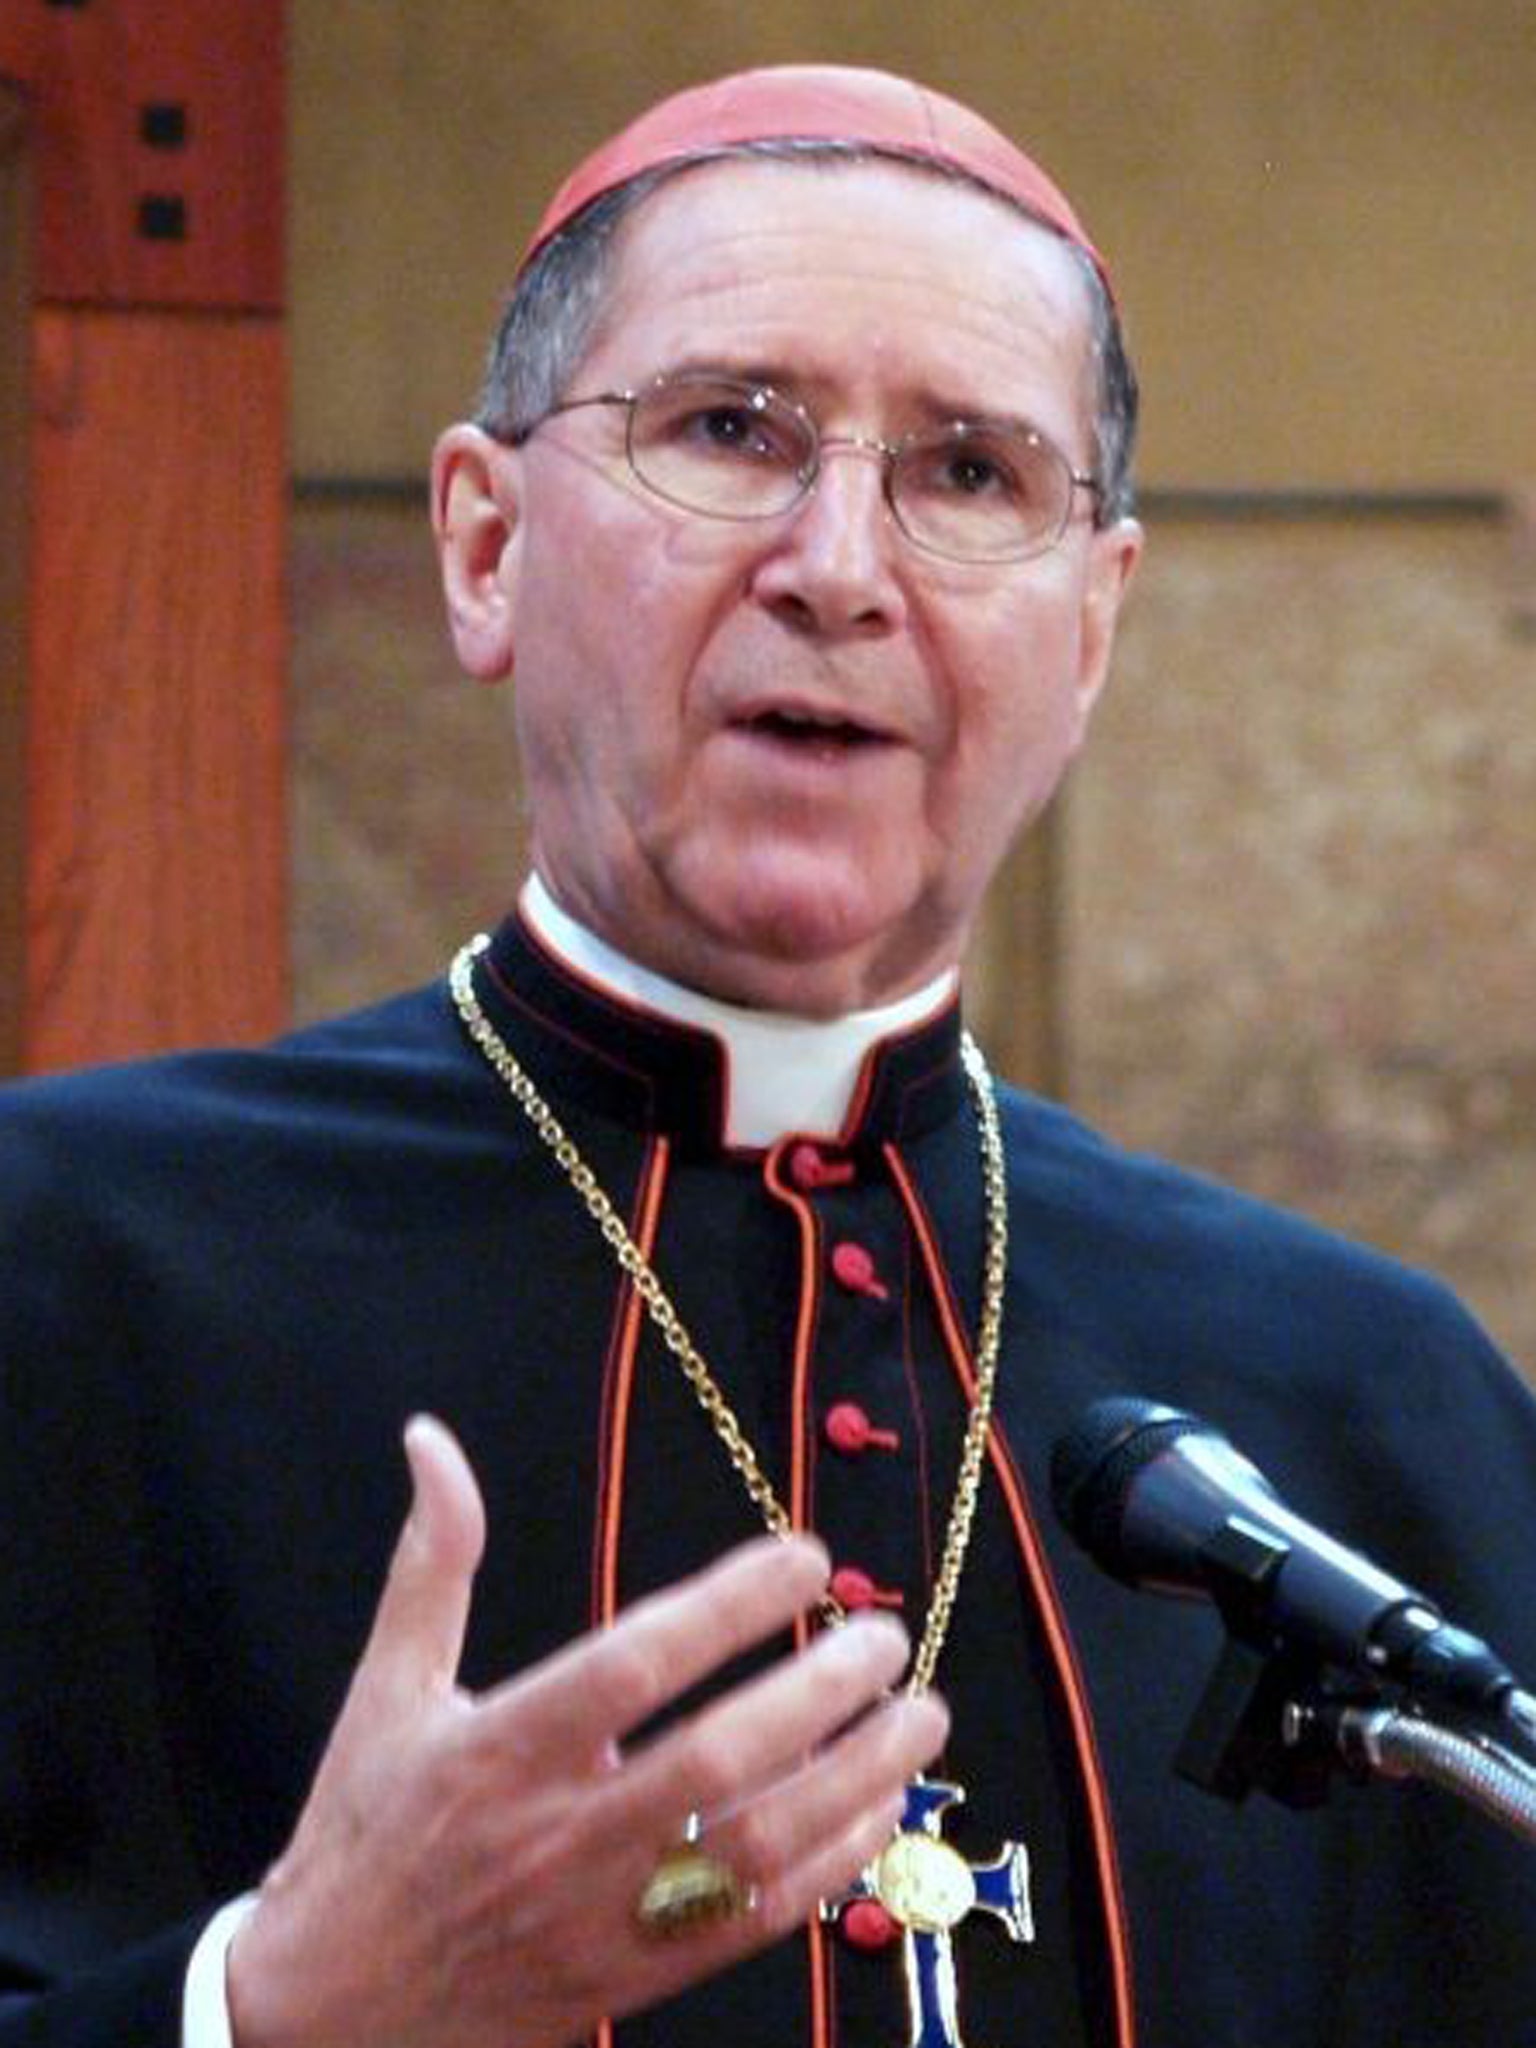 Cardinal Roger Mahony was accused of helping a confessed paedophile priest evade law enforcement by sending him out of state to a Church-run treatment center, then placing the priest back in the Los Angeles ministry